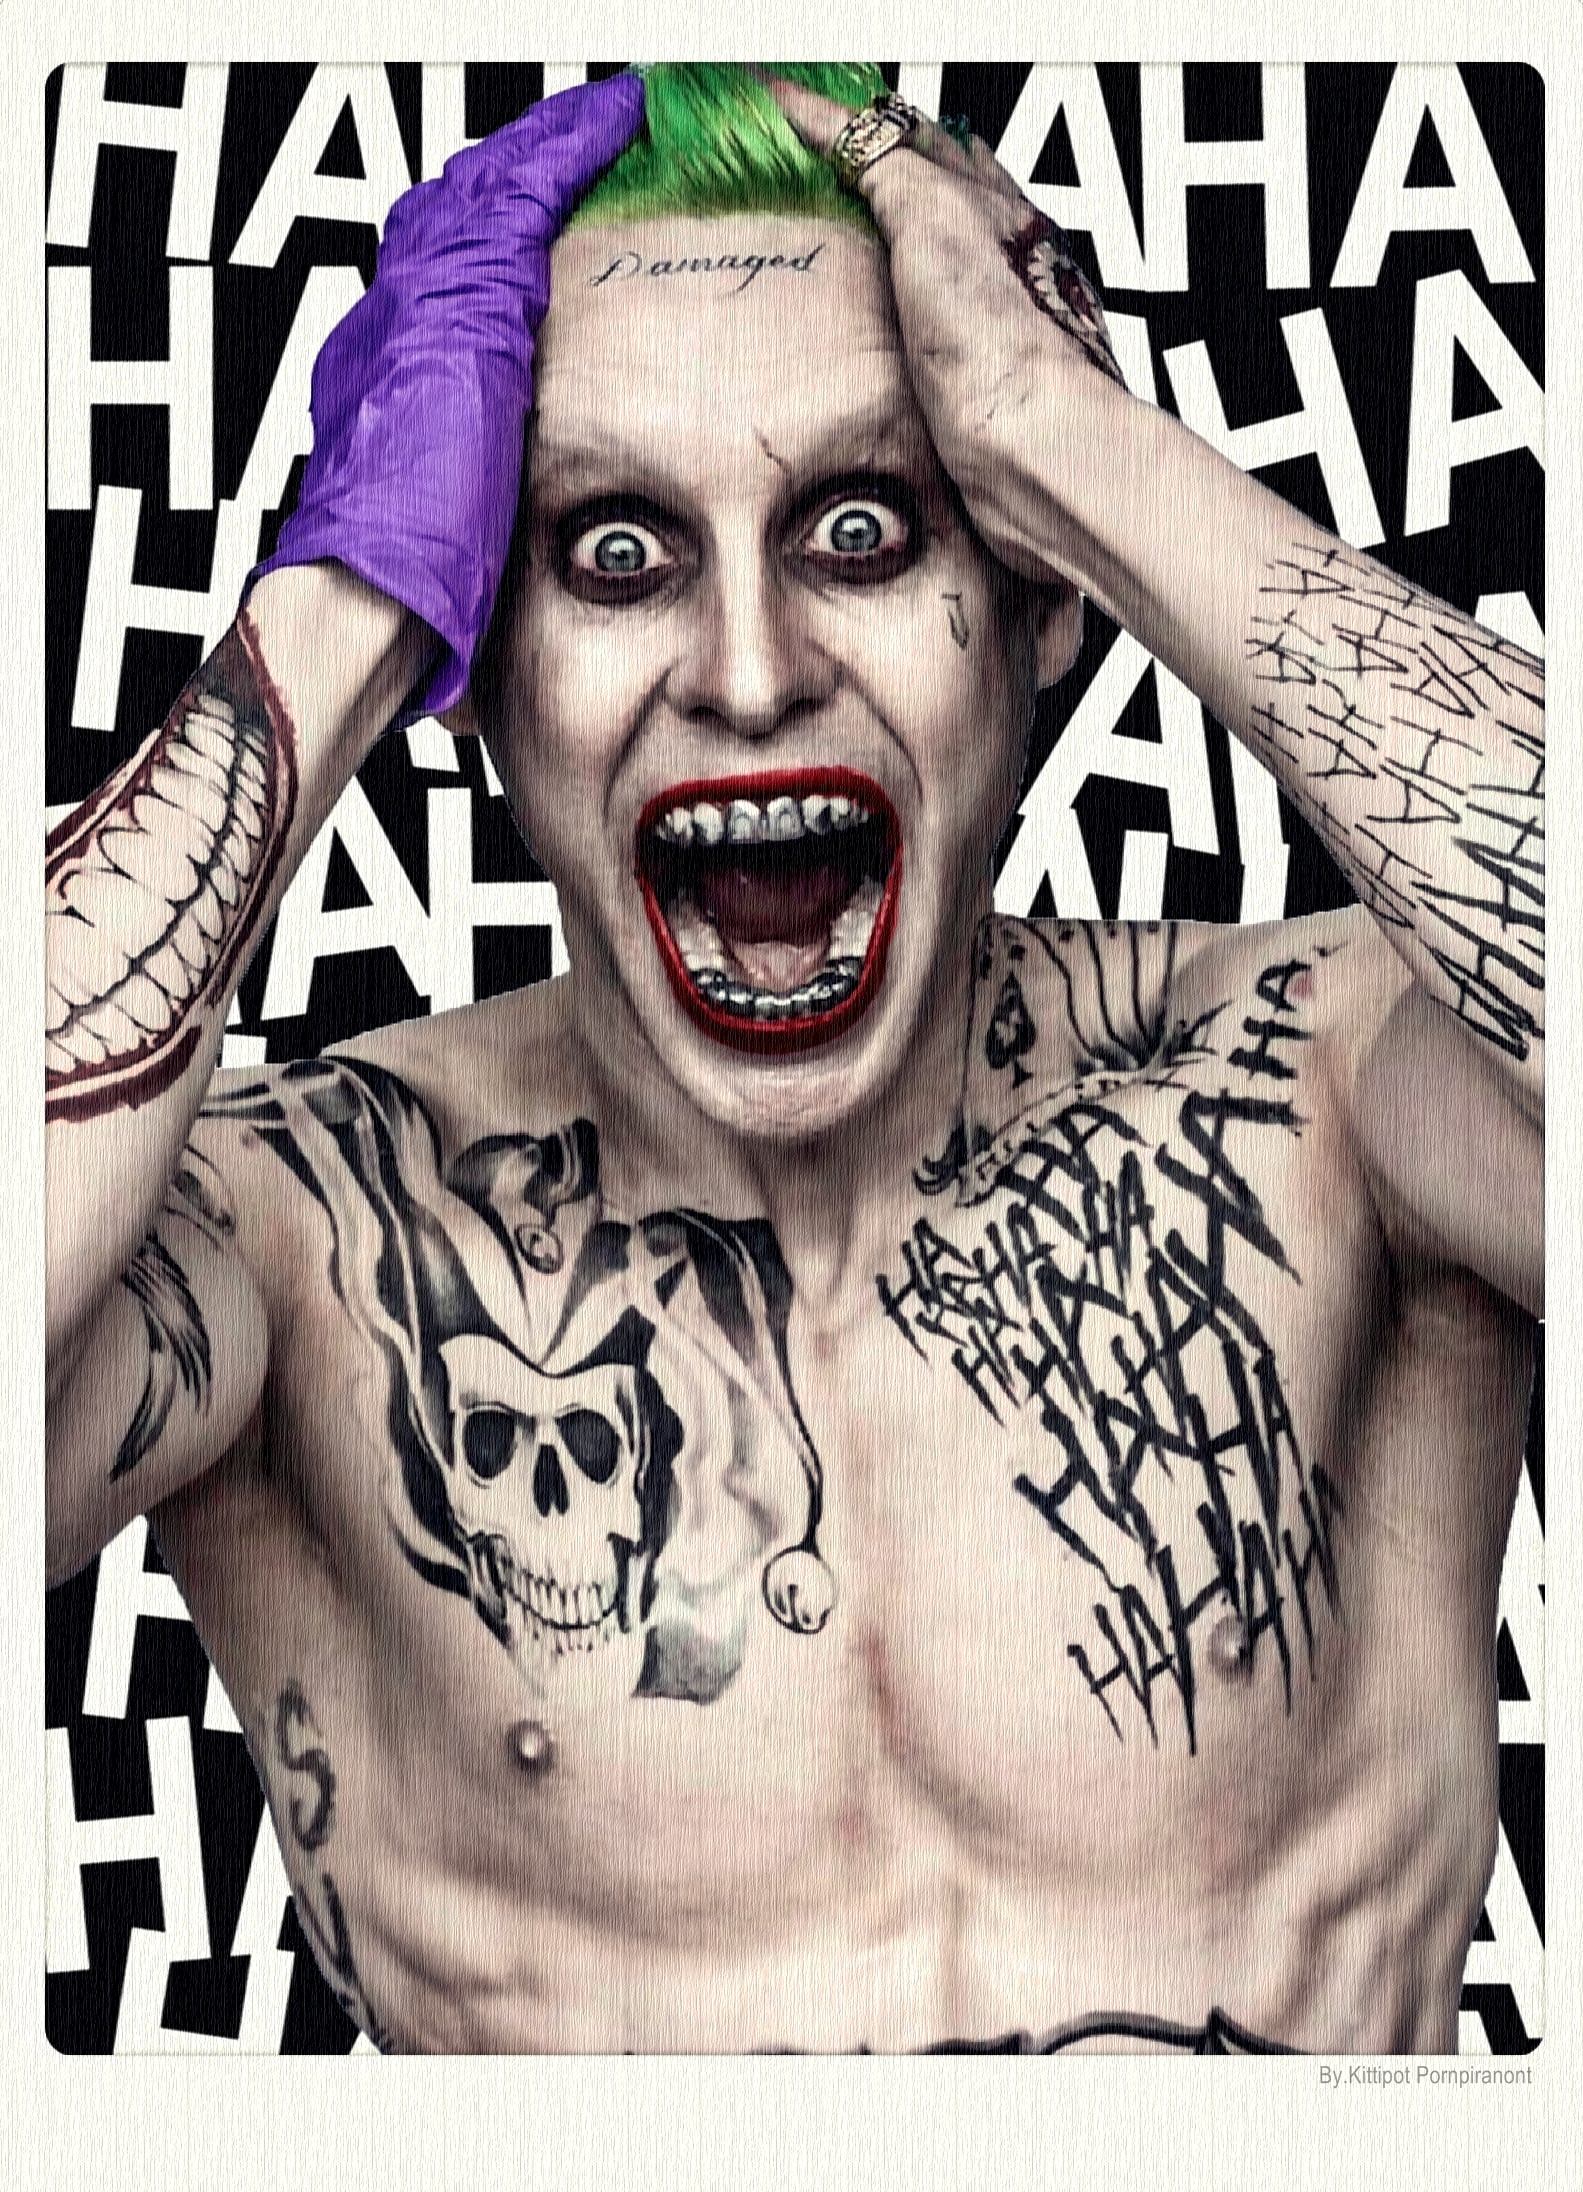 Was Jared Leto’s Joker Previously Robin? Here’s All The Evidence